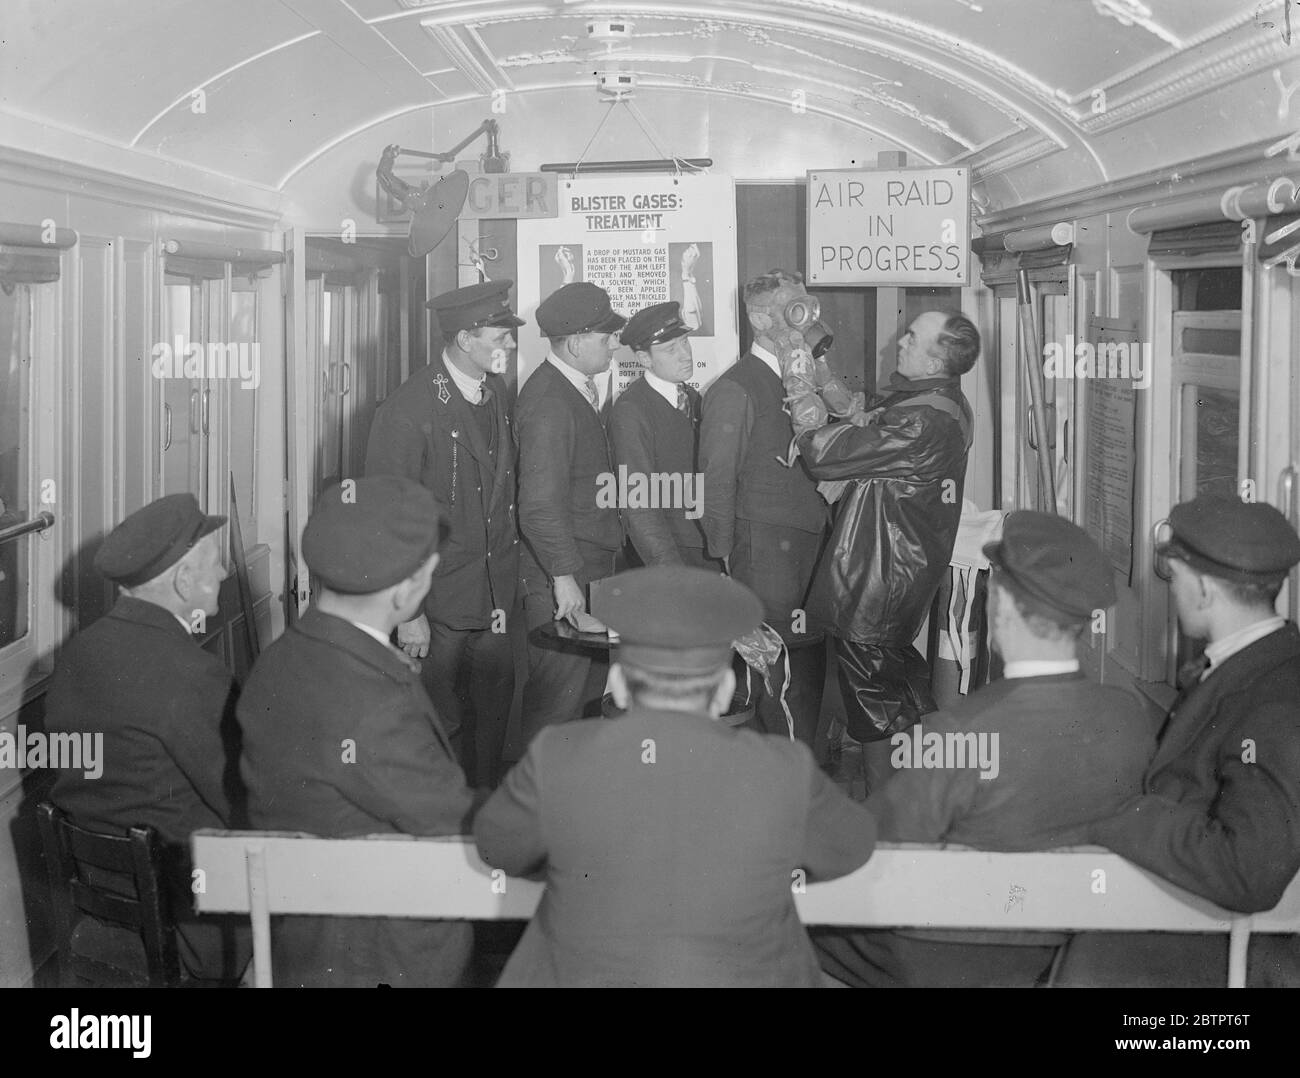 'Guarded' against gas. Anti Air Raid training at Euston. And IMS Air Raid Precaution Mobile Instructional Unit was on view at Euston station, London. The unit consist of two vehicles, one a lecture coach and the other a decontamination coach. It has been provided by the IMS Railway as part of a scheme for the training of their staff in Air Raid Precautions. The mobile unit is soon to undertake a tour of the IMS system in England, Scotland and Wales. They railway intends to train nearly 23,000 of their 230,000 workers in anti air raid work. Photo shows, railwaymen being fitted with gas masks. A Stock Photo